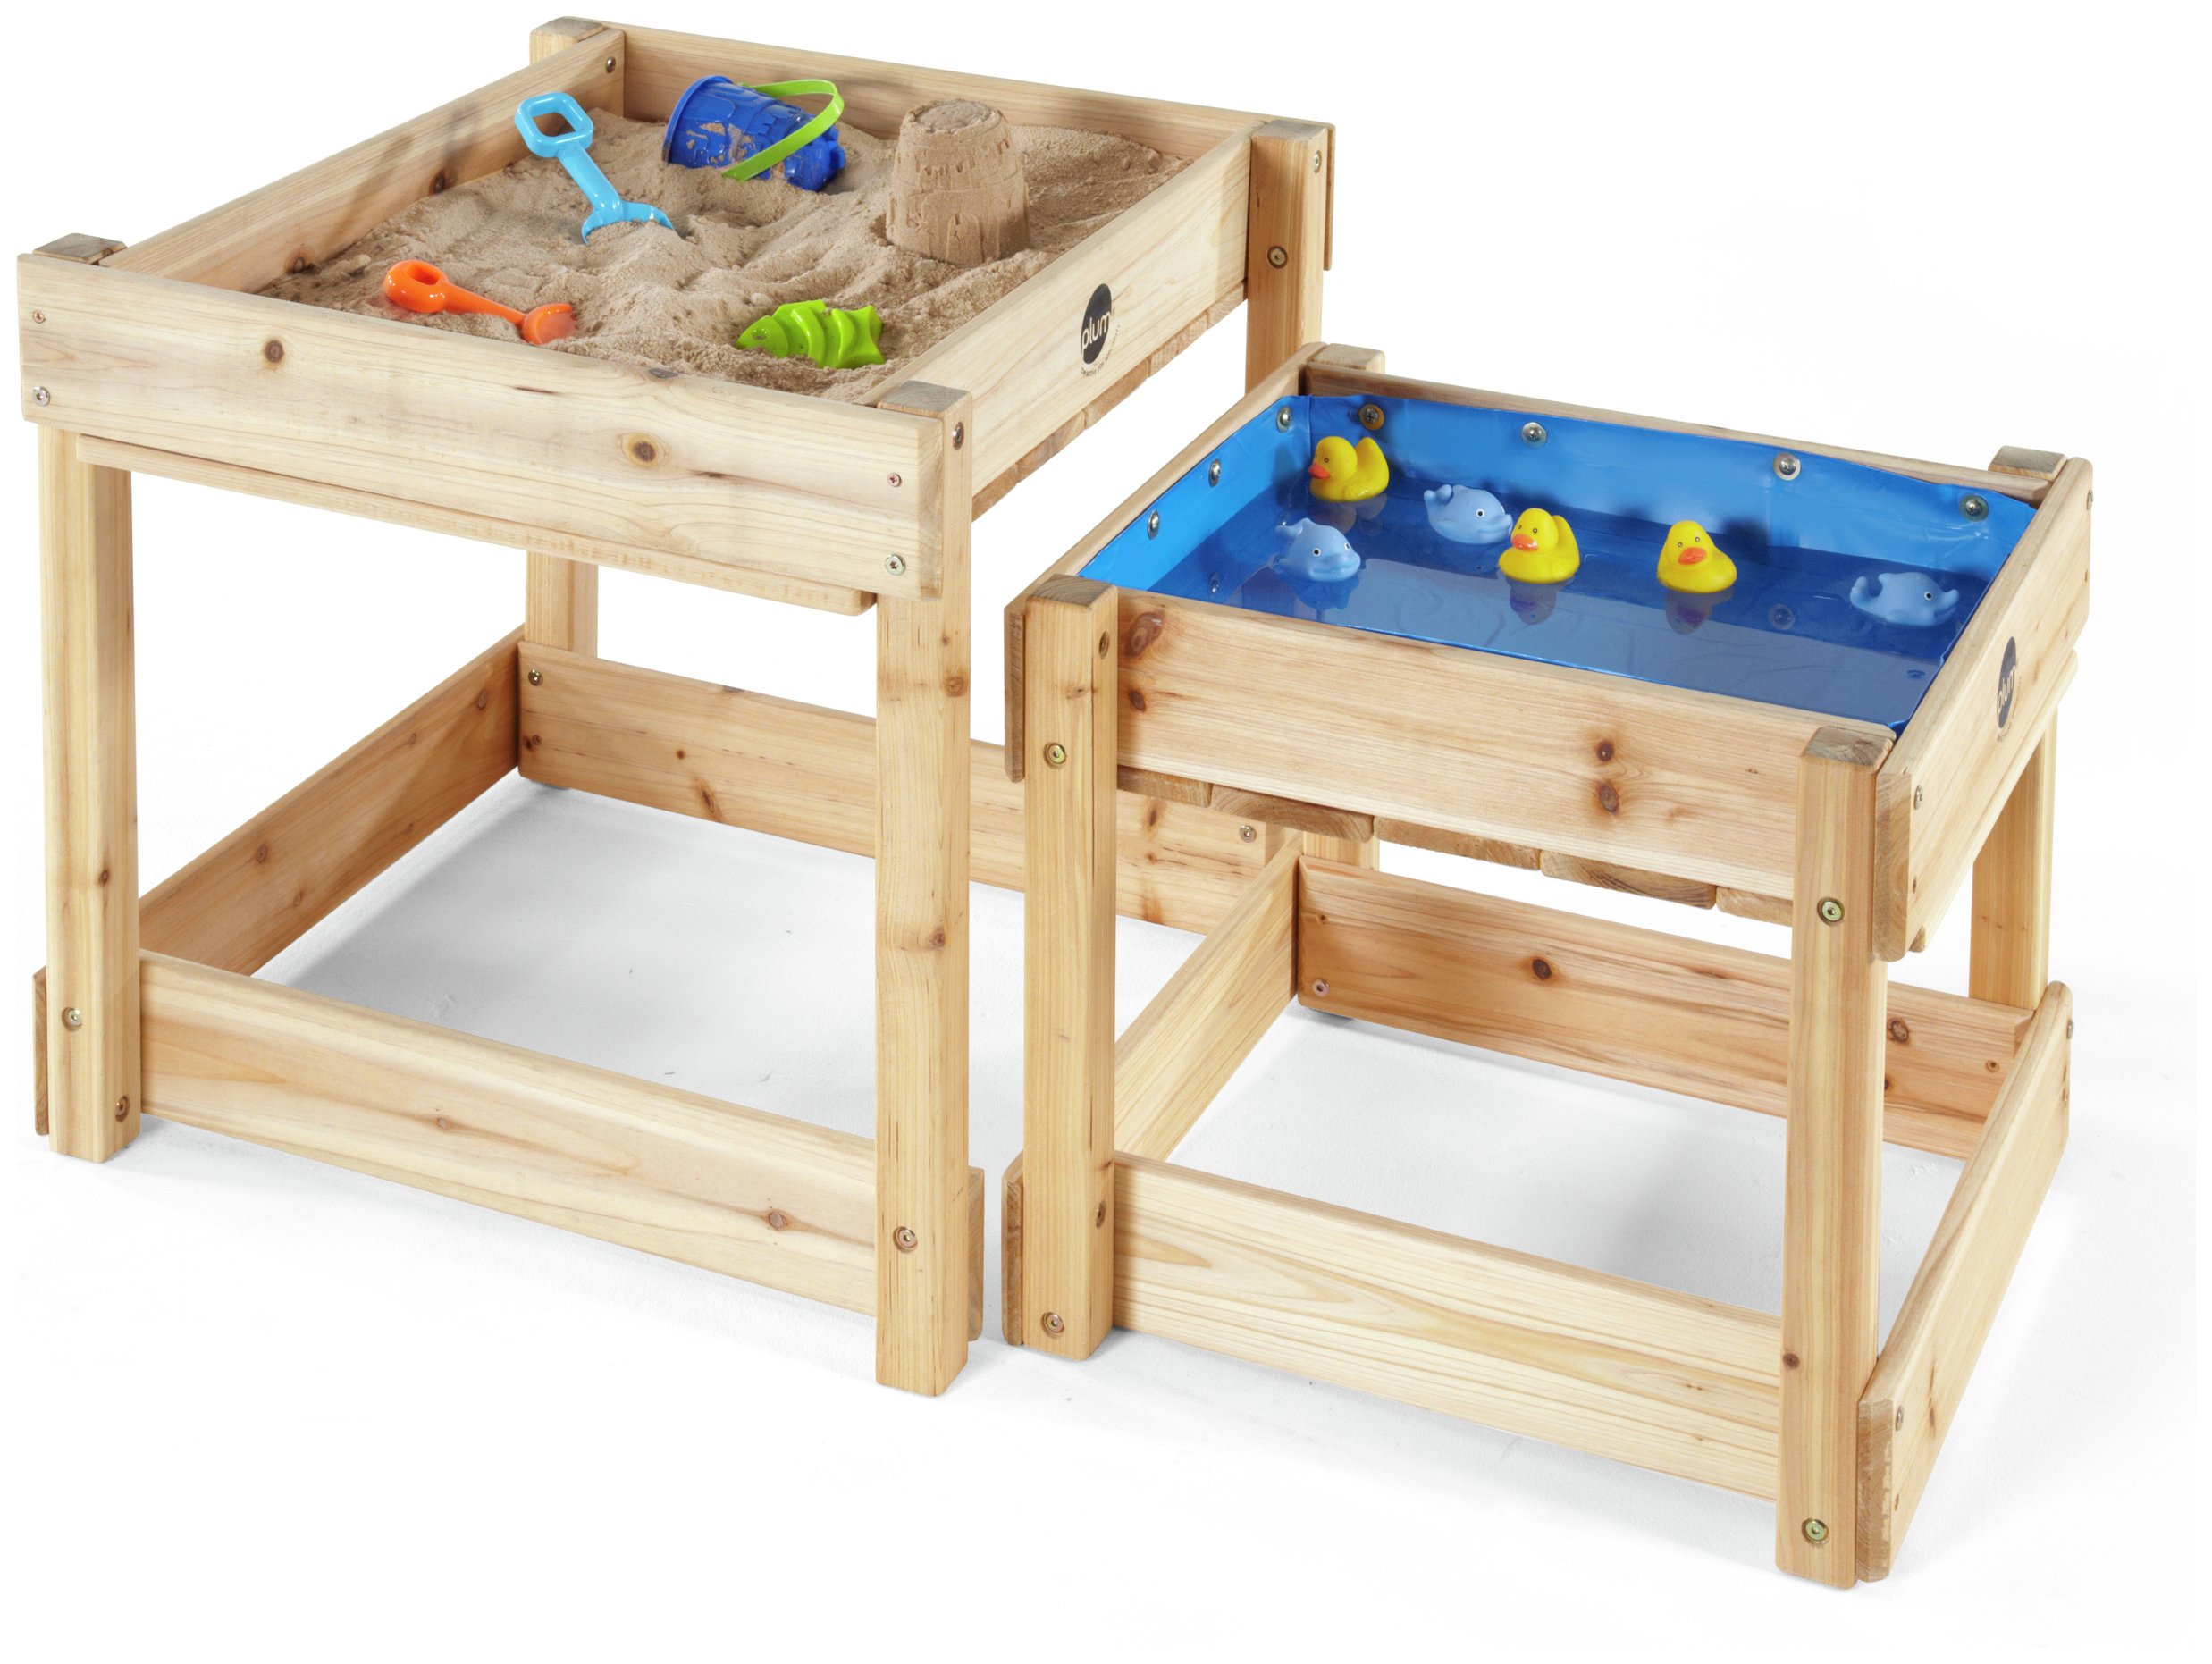 Plum Sandy Bay Wooden Sand Pit and Water Table. review